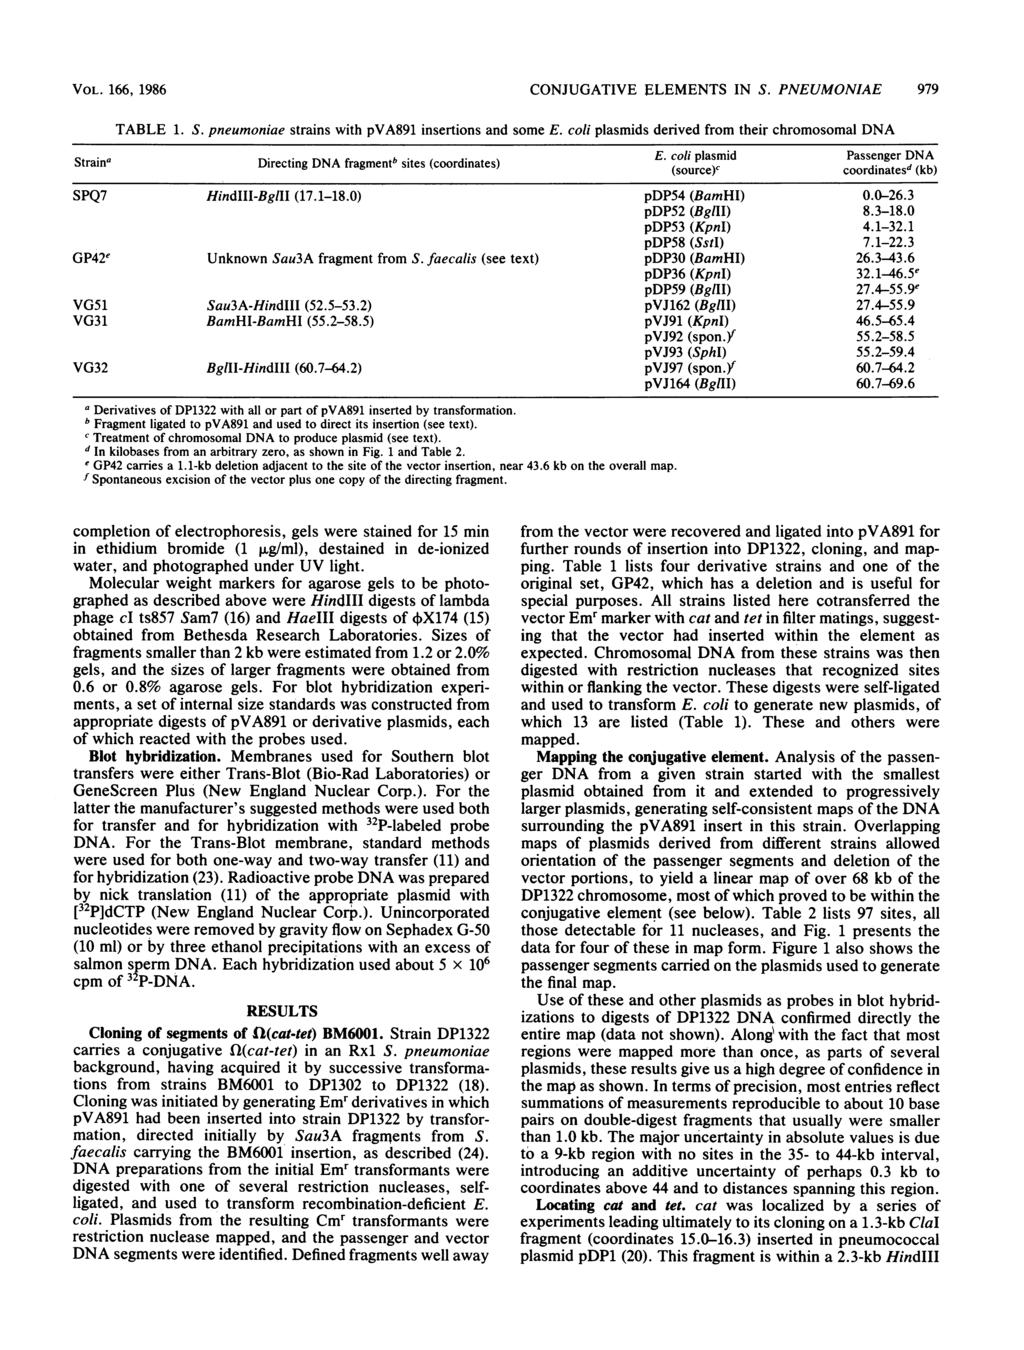 VOL. 166, 1986 TABLE 1. CONJUGATIVE ELEMENTS IN S. PNEUMONIAE 979 S. pneumoniae strains with pva891 insertions and some E.